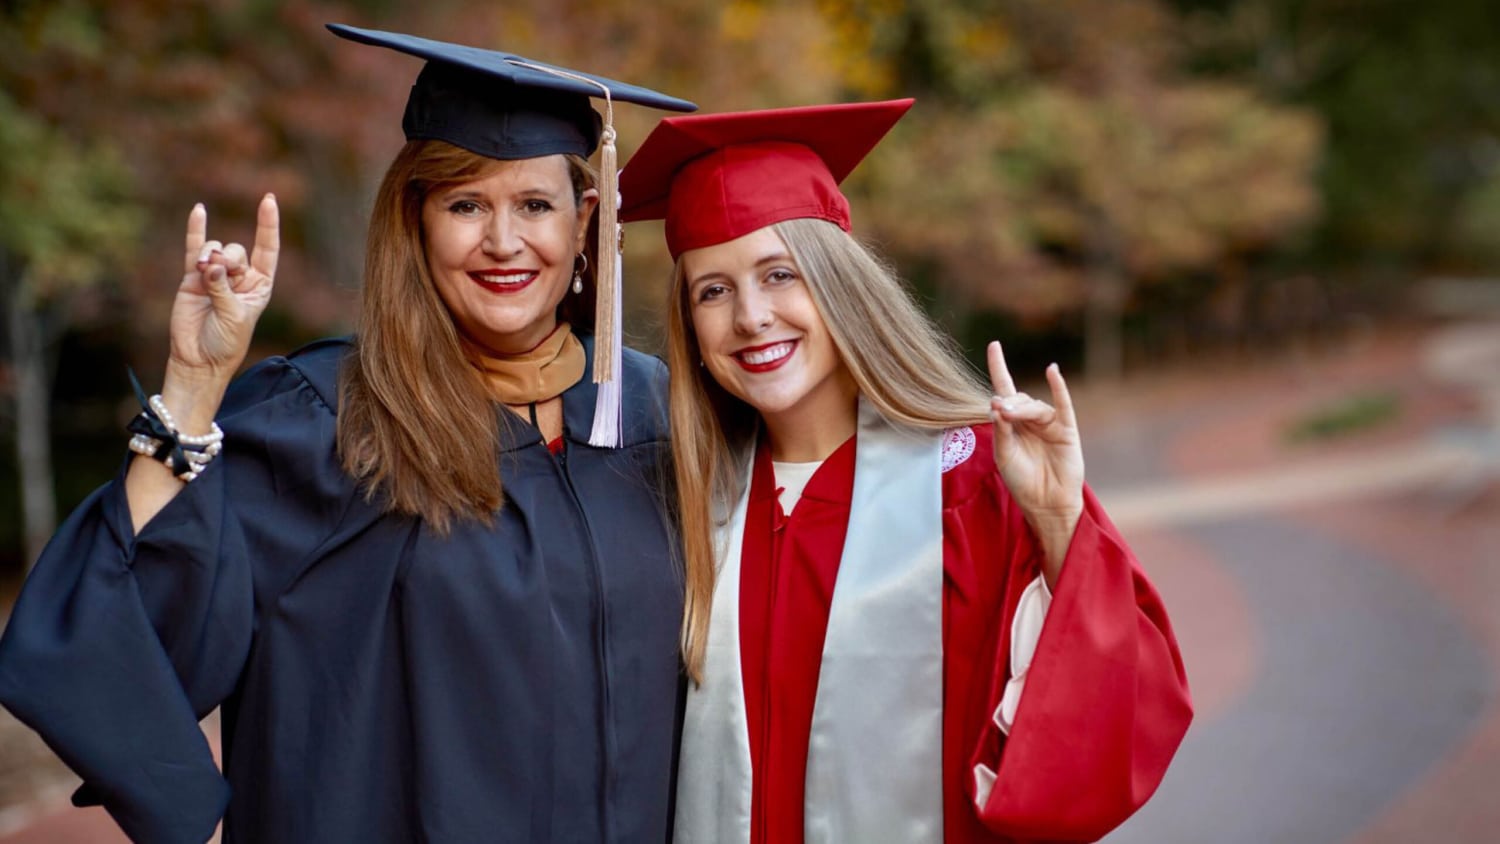 A mother and daughter in graduation caps and gowns